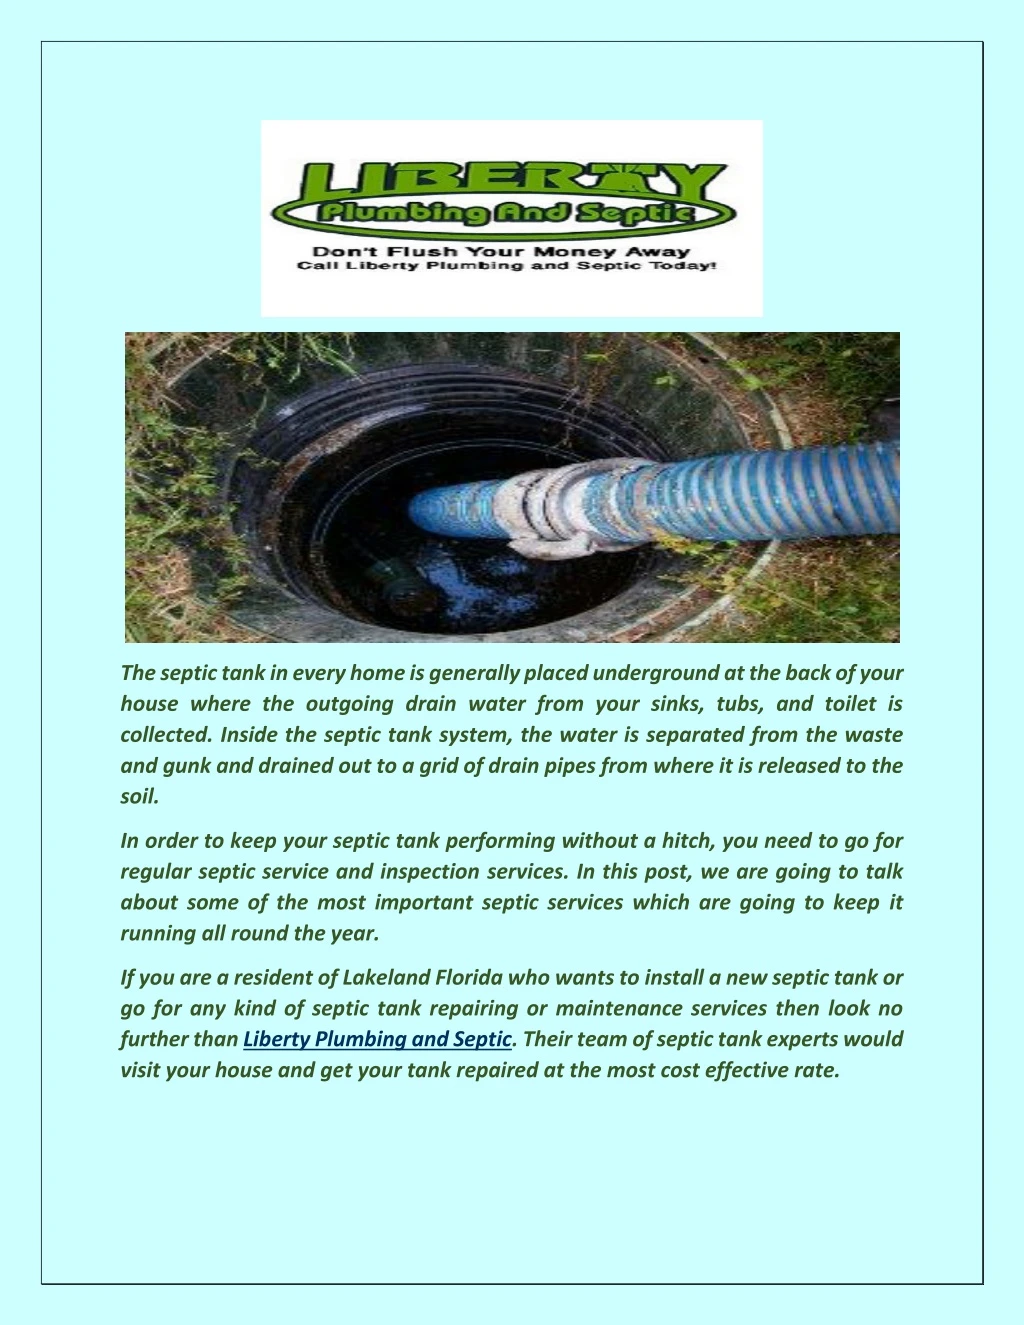 the septic tank in every home is generally placed